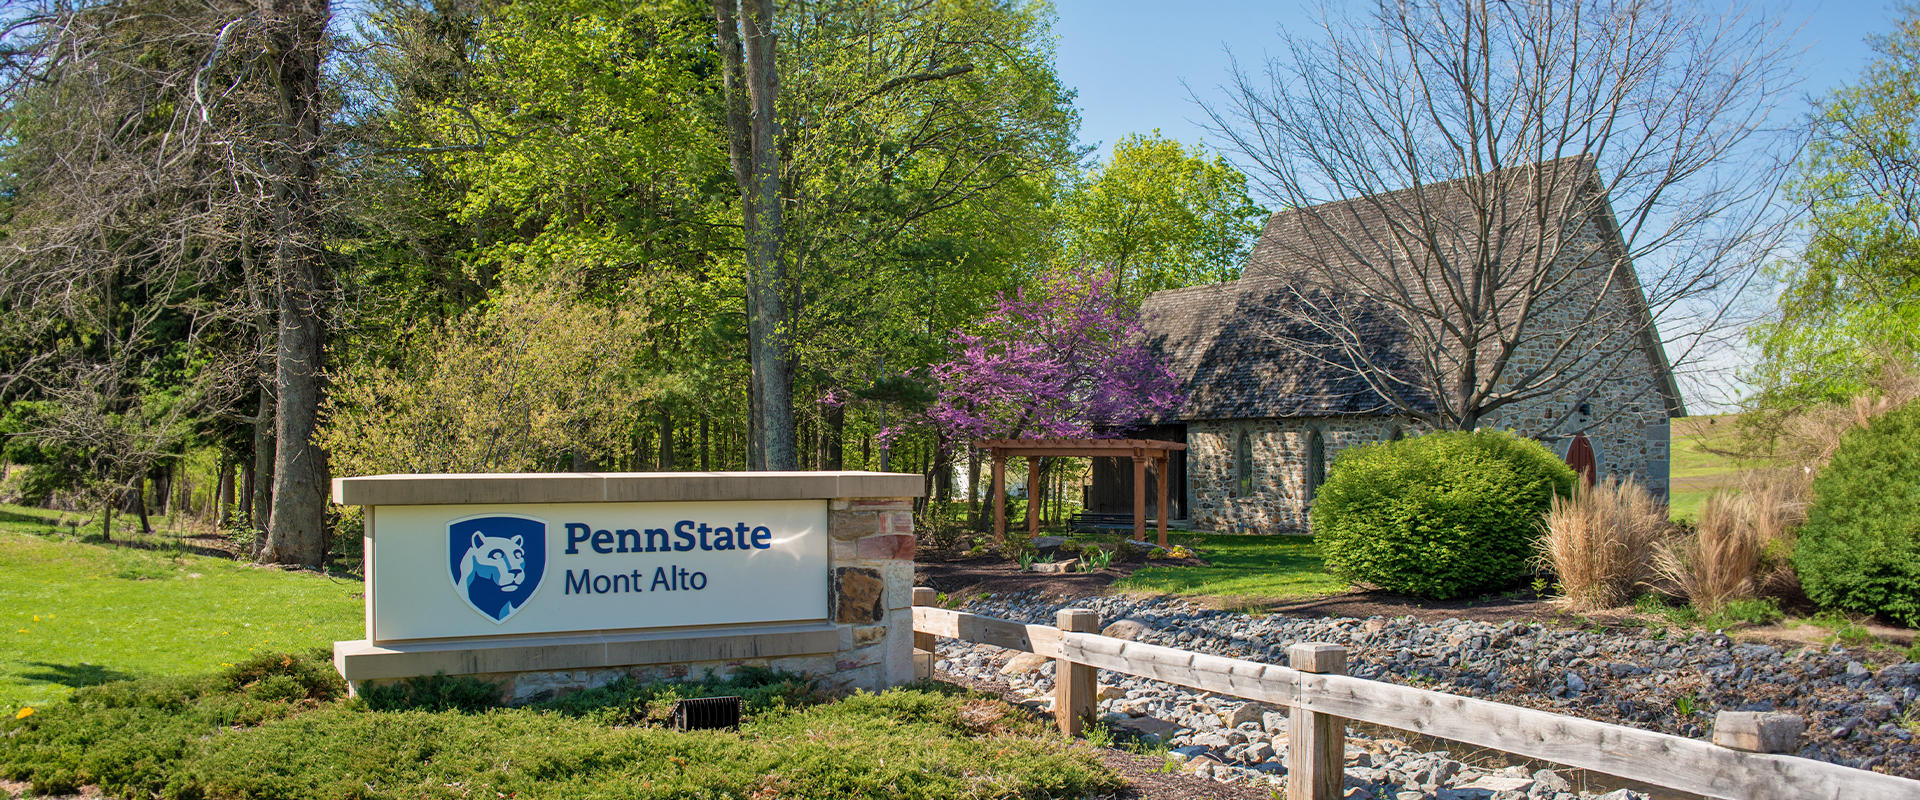 Welcome sign at the entrance of Penn State Mont Alto